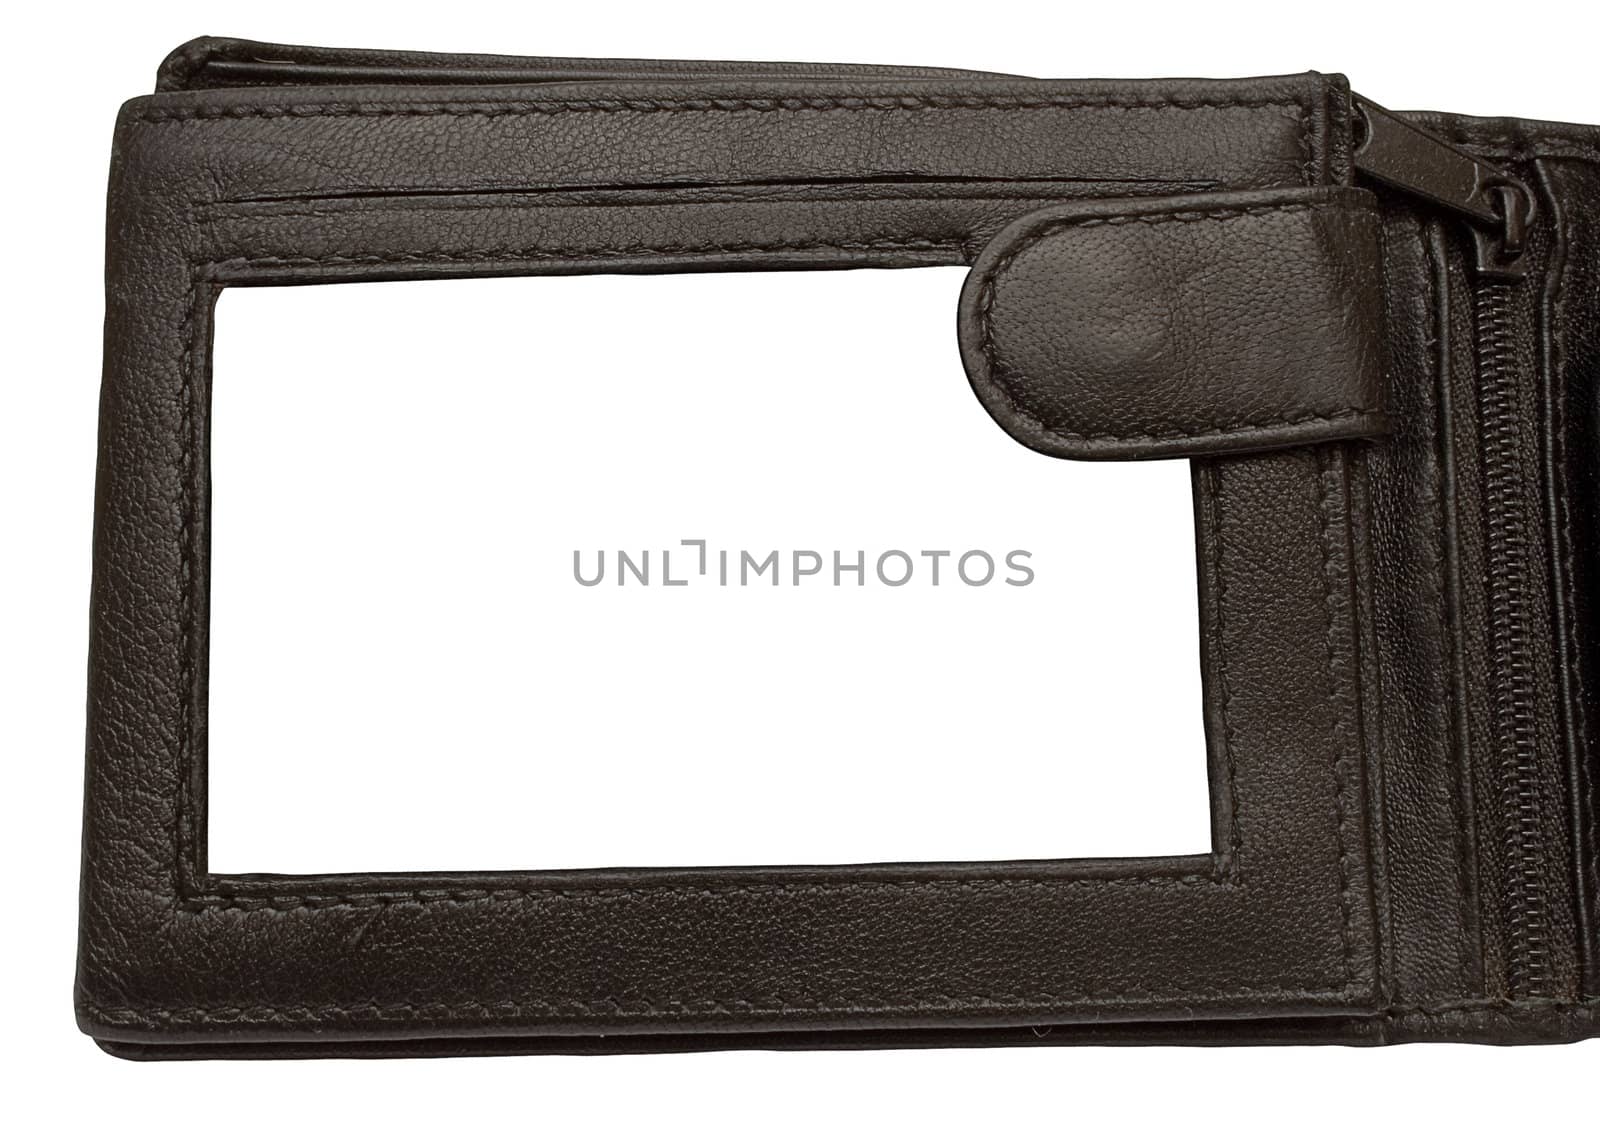 Cut-out wallet picture frame. Isolated on a white background. File contains clipping path.